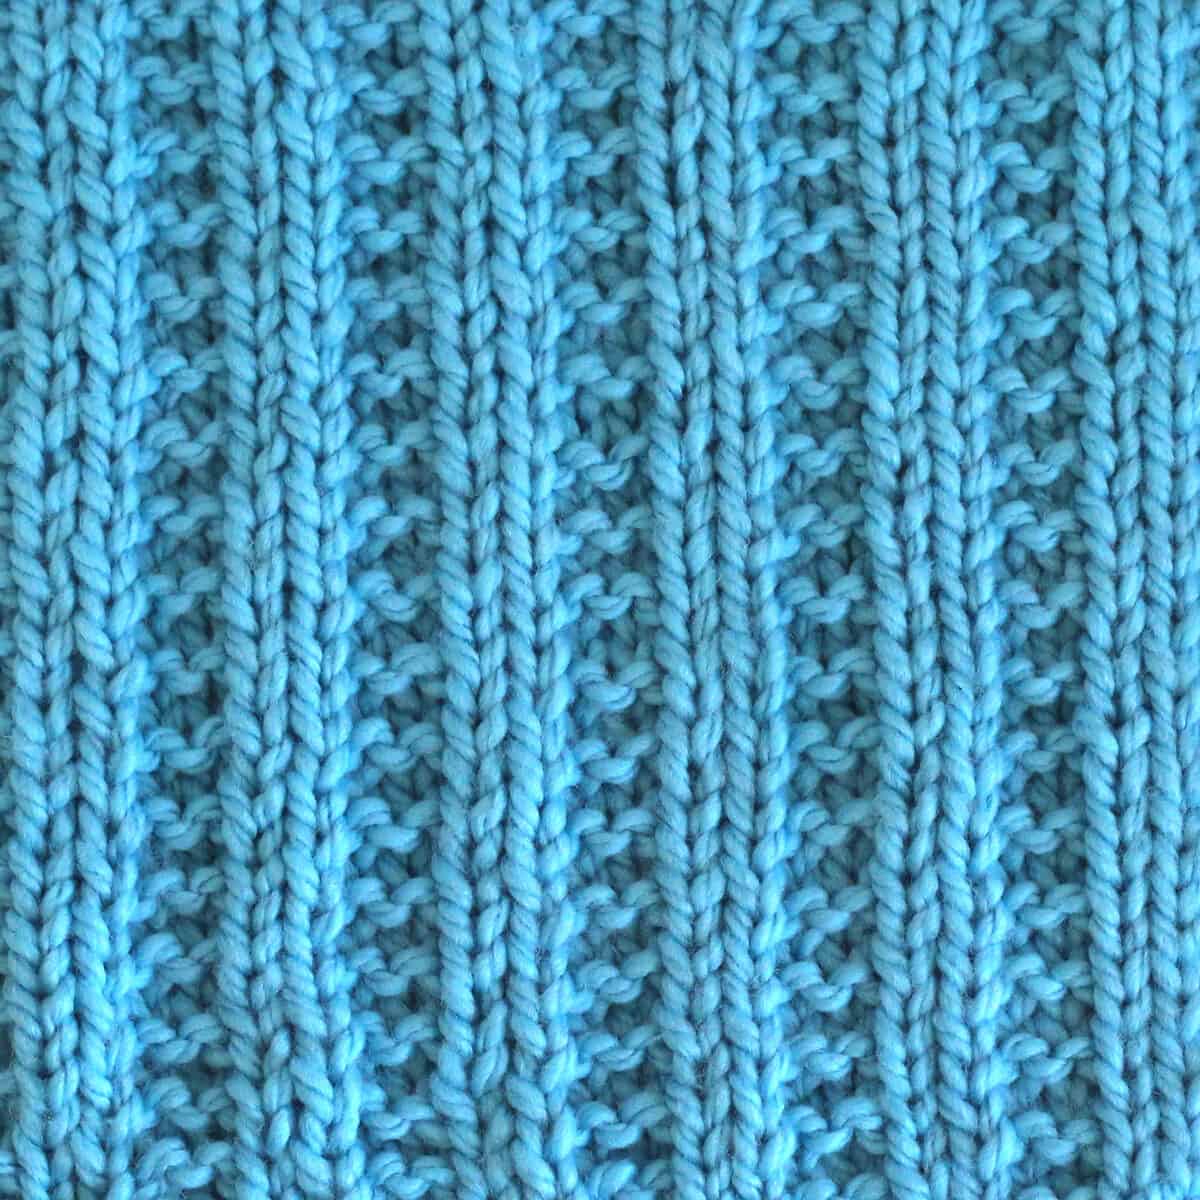 Garter Ribbing knit stitch texture in blue color yarn.